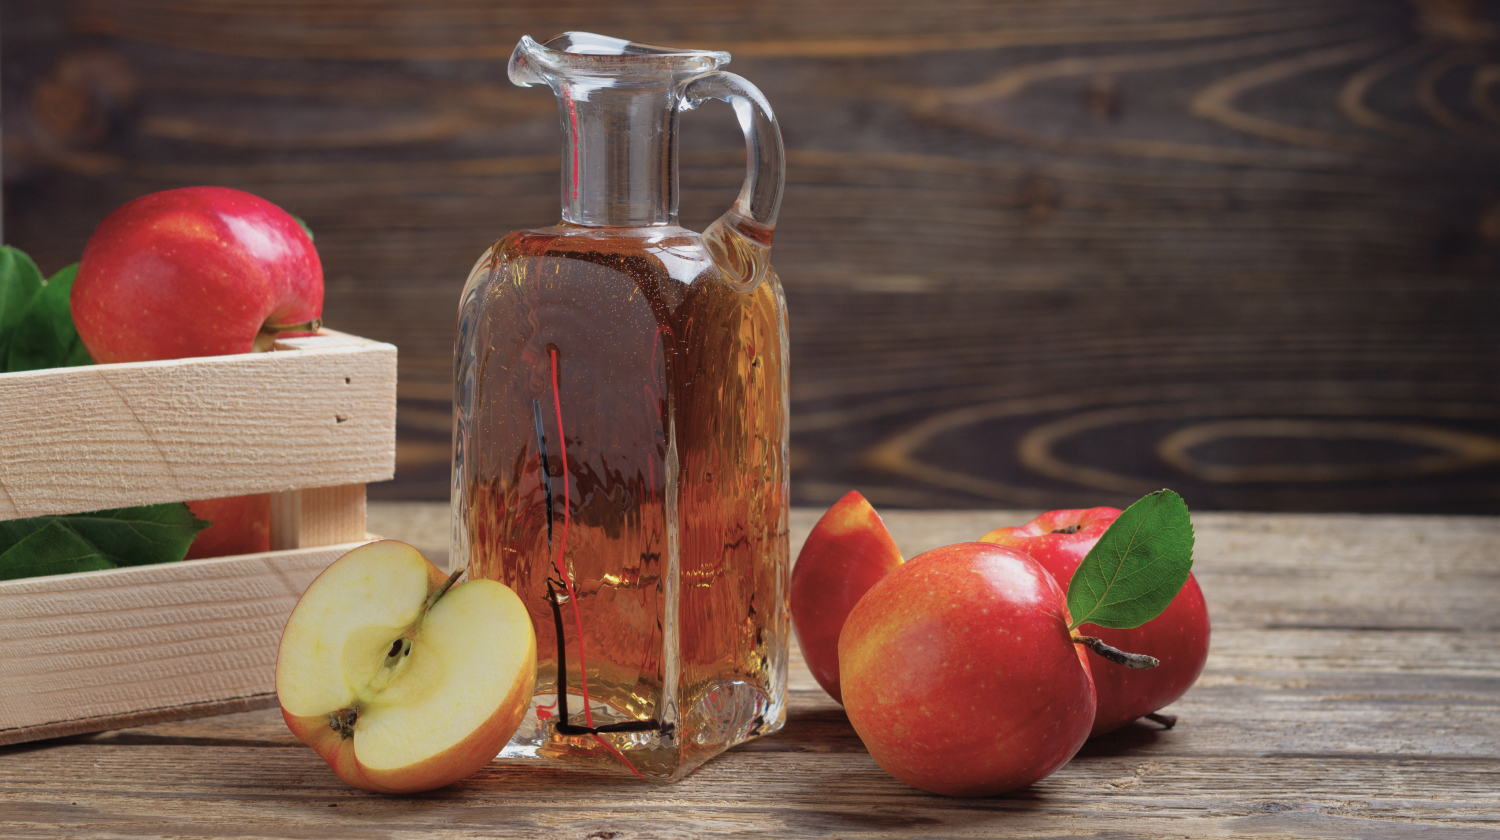 Benefits of Douching With Apple Cider Vinegar: Does It Work?